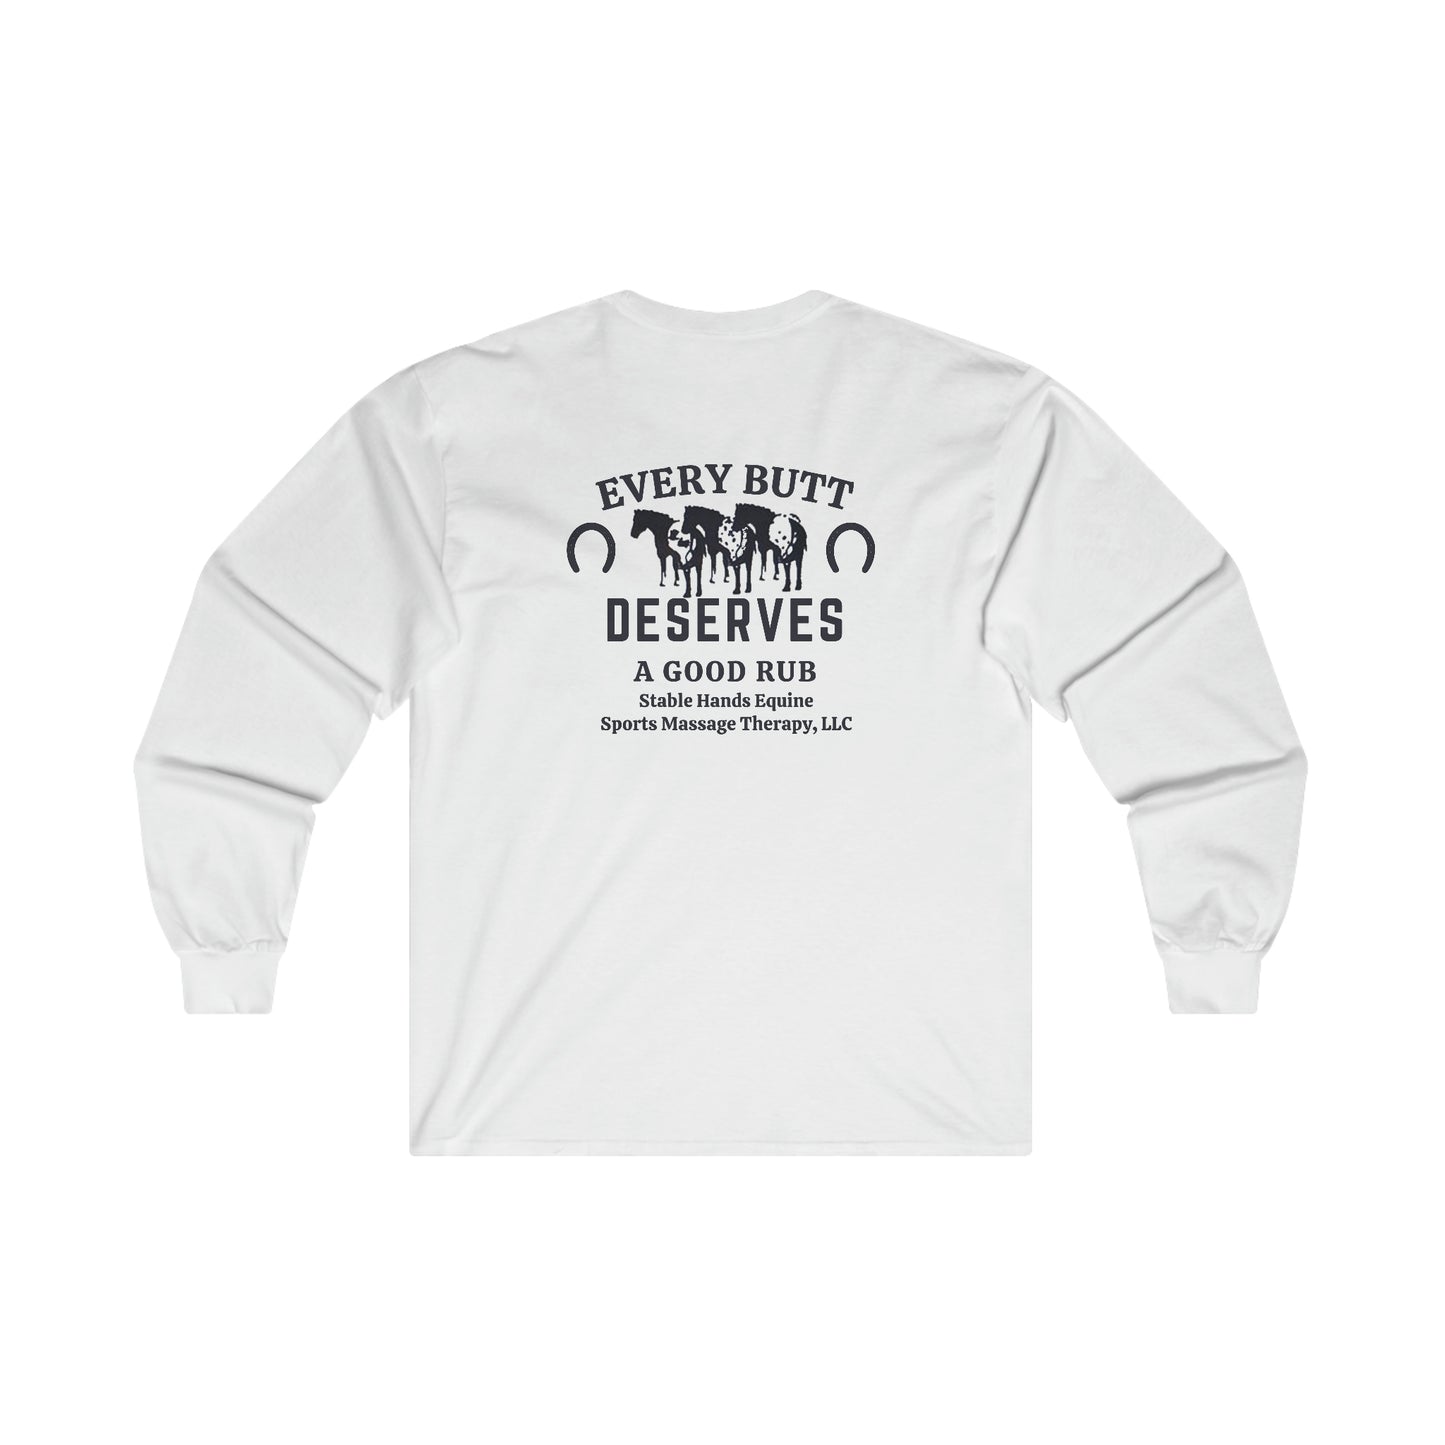 Every Butt Deserves A Good Rub Stable Hands Equine Sports Massage Therapy, LLC Unisex Ultra Cotton Long Sleeve Tee